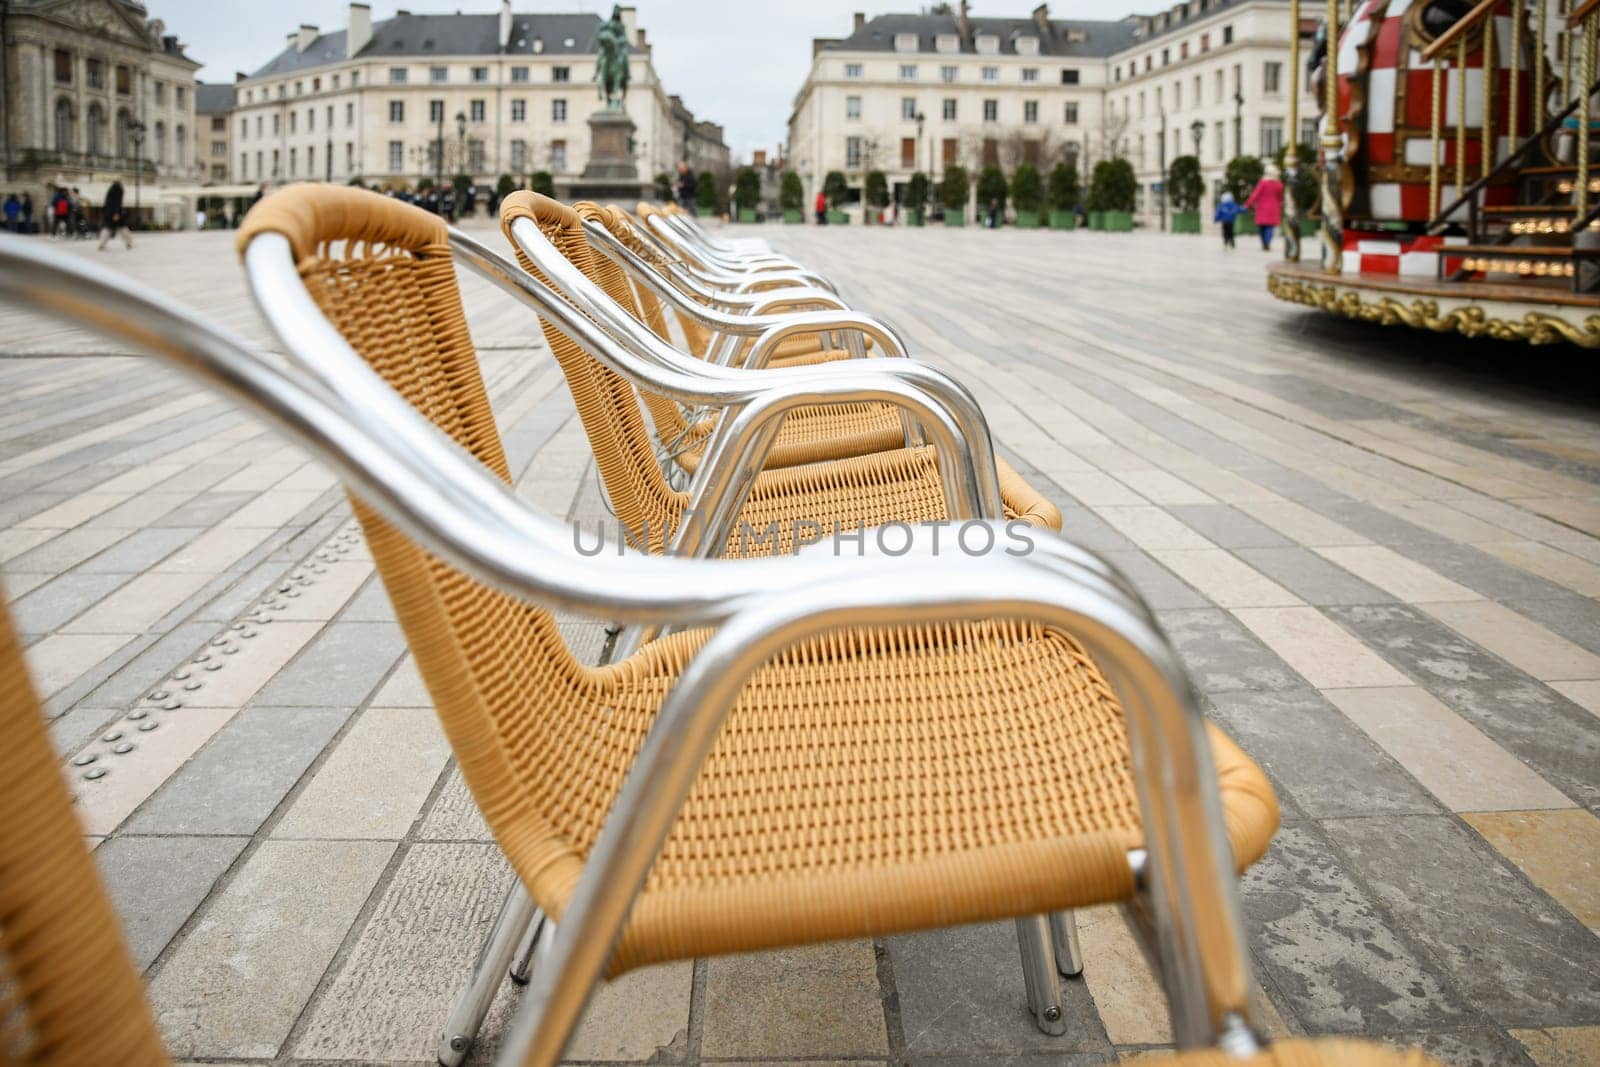 Wicker chairs in the main square of Orleans by Godi